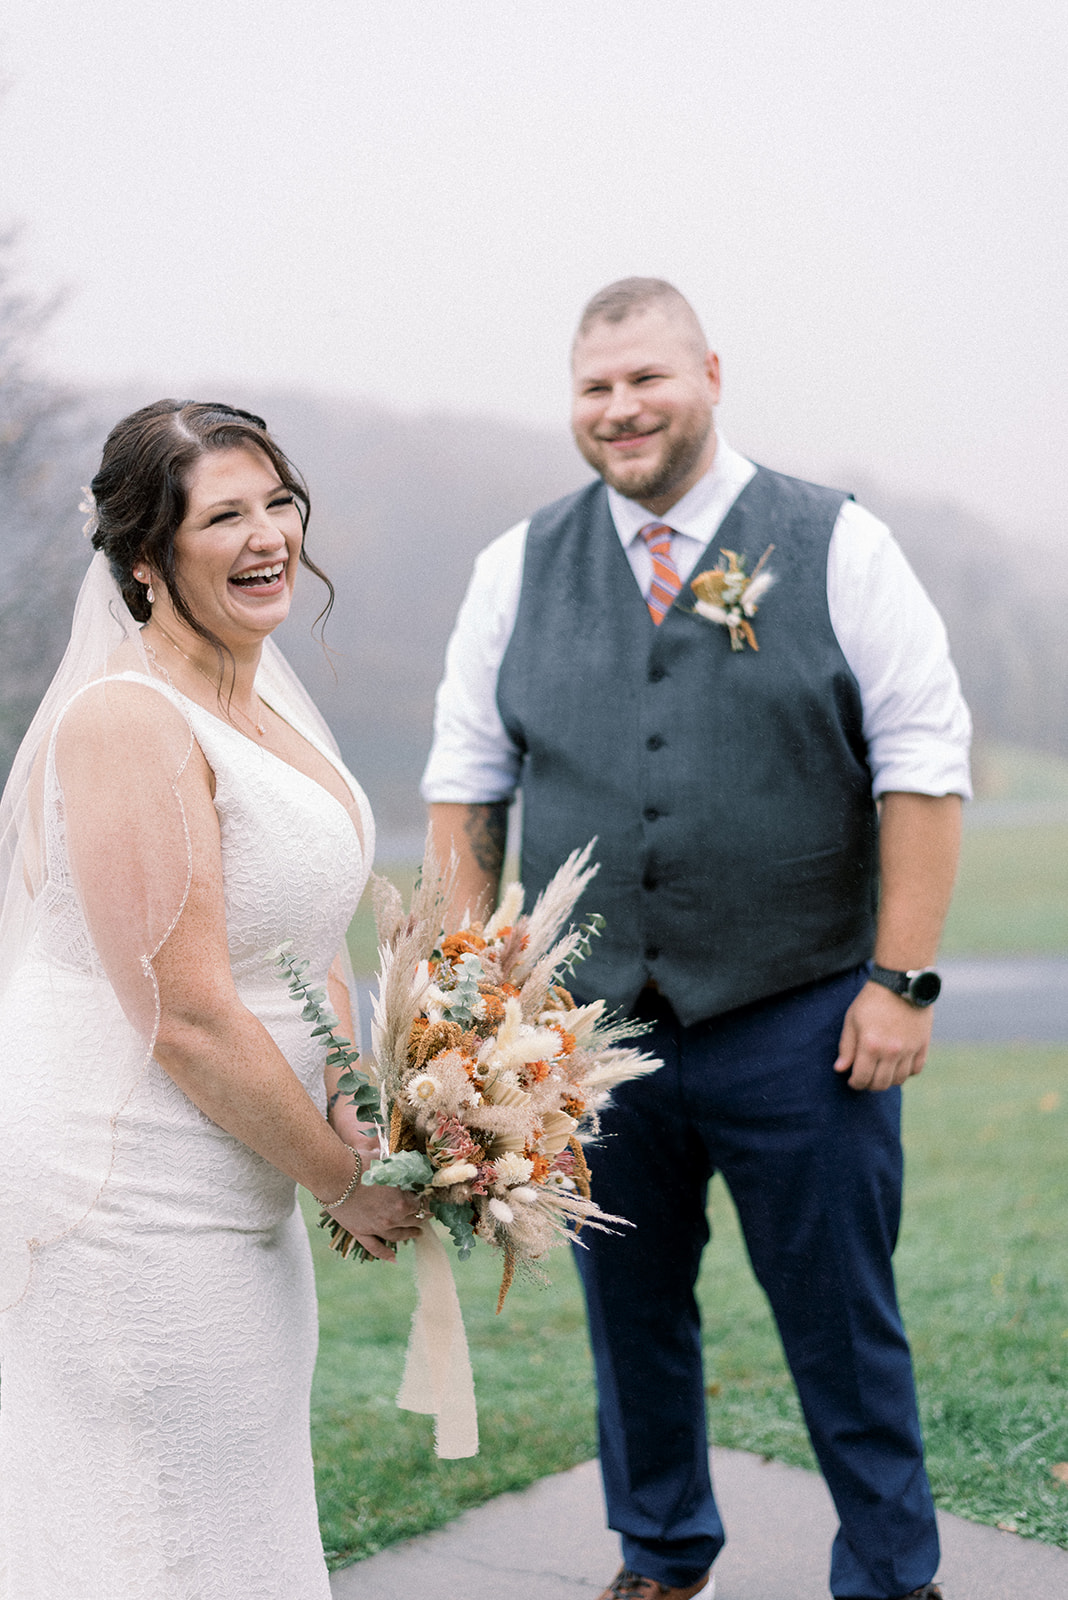 Pennsylvania wedding photographer captures bride laughing after first look